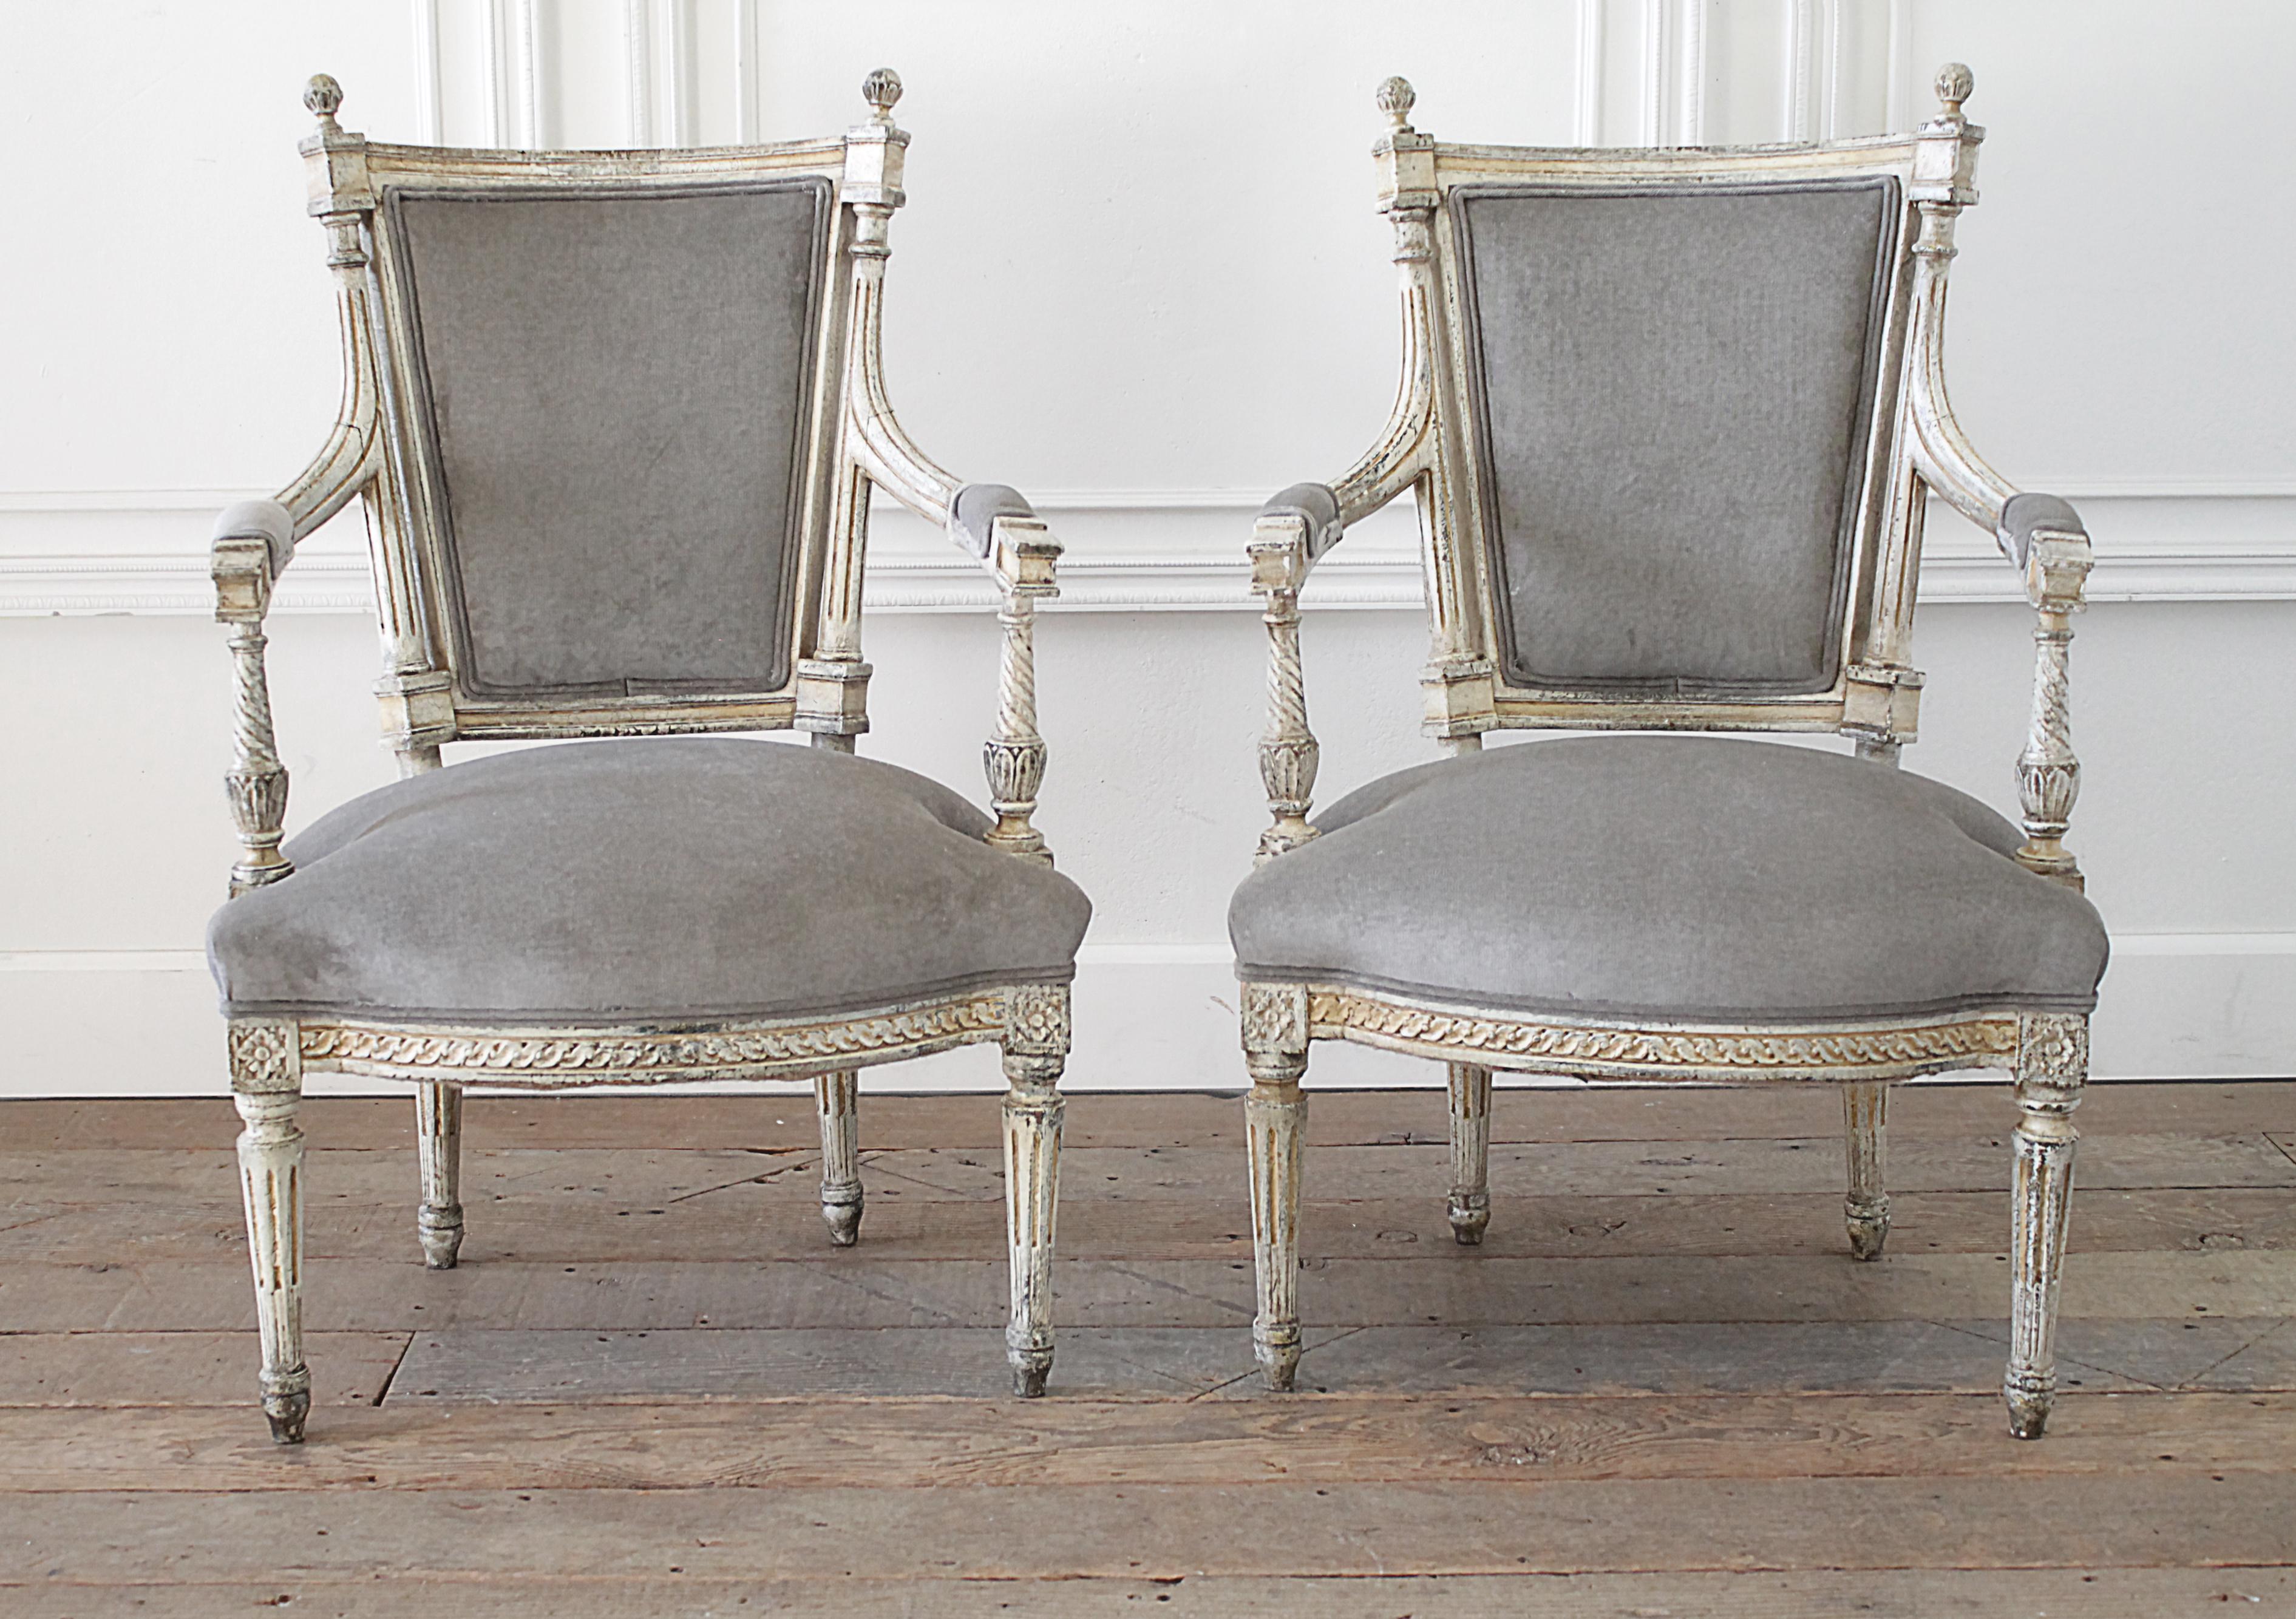 19th century pair of painted and upholstered open arm fauteuils in the Louis XVI style.
Beautiful original painted finish in a creamy white finish, with grey patina, and antique brown glaze finish. Lovely carved details along the seat bottom edges,